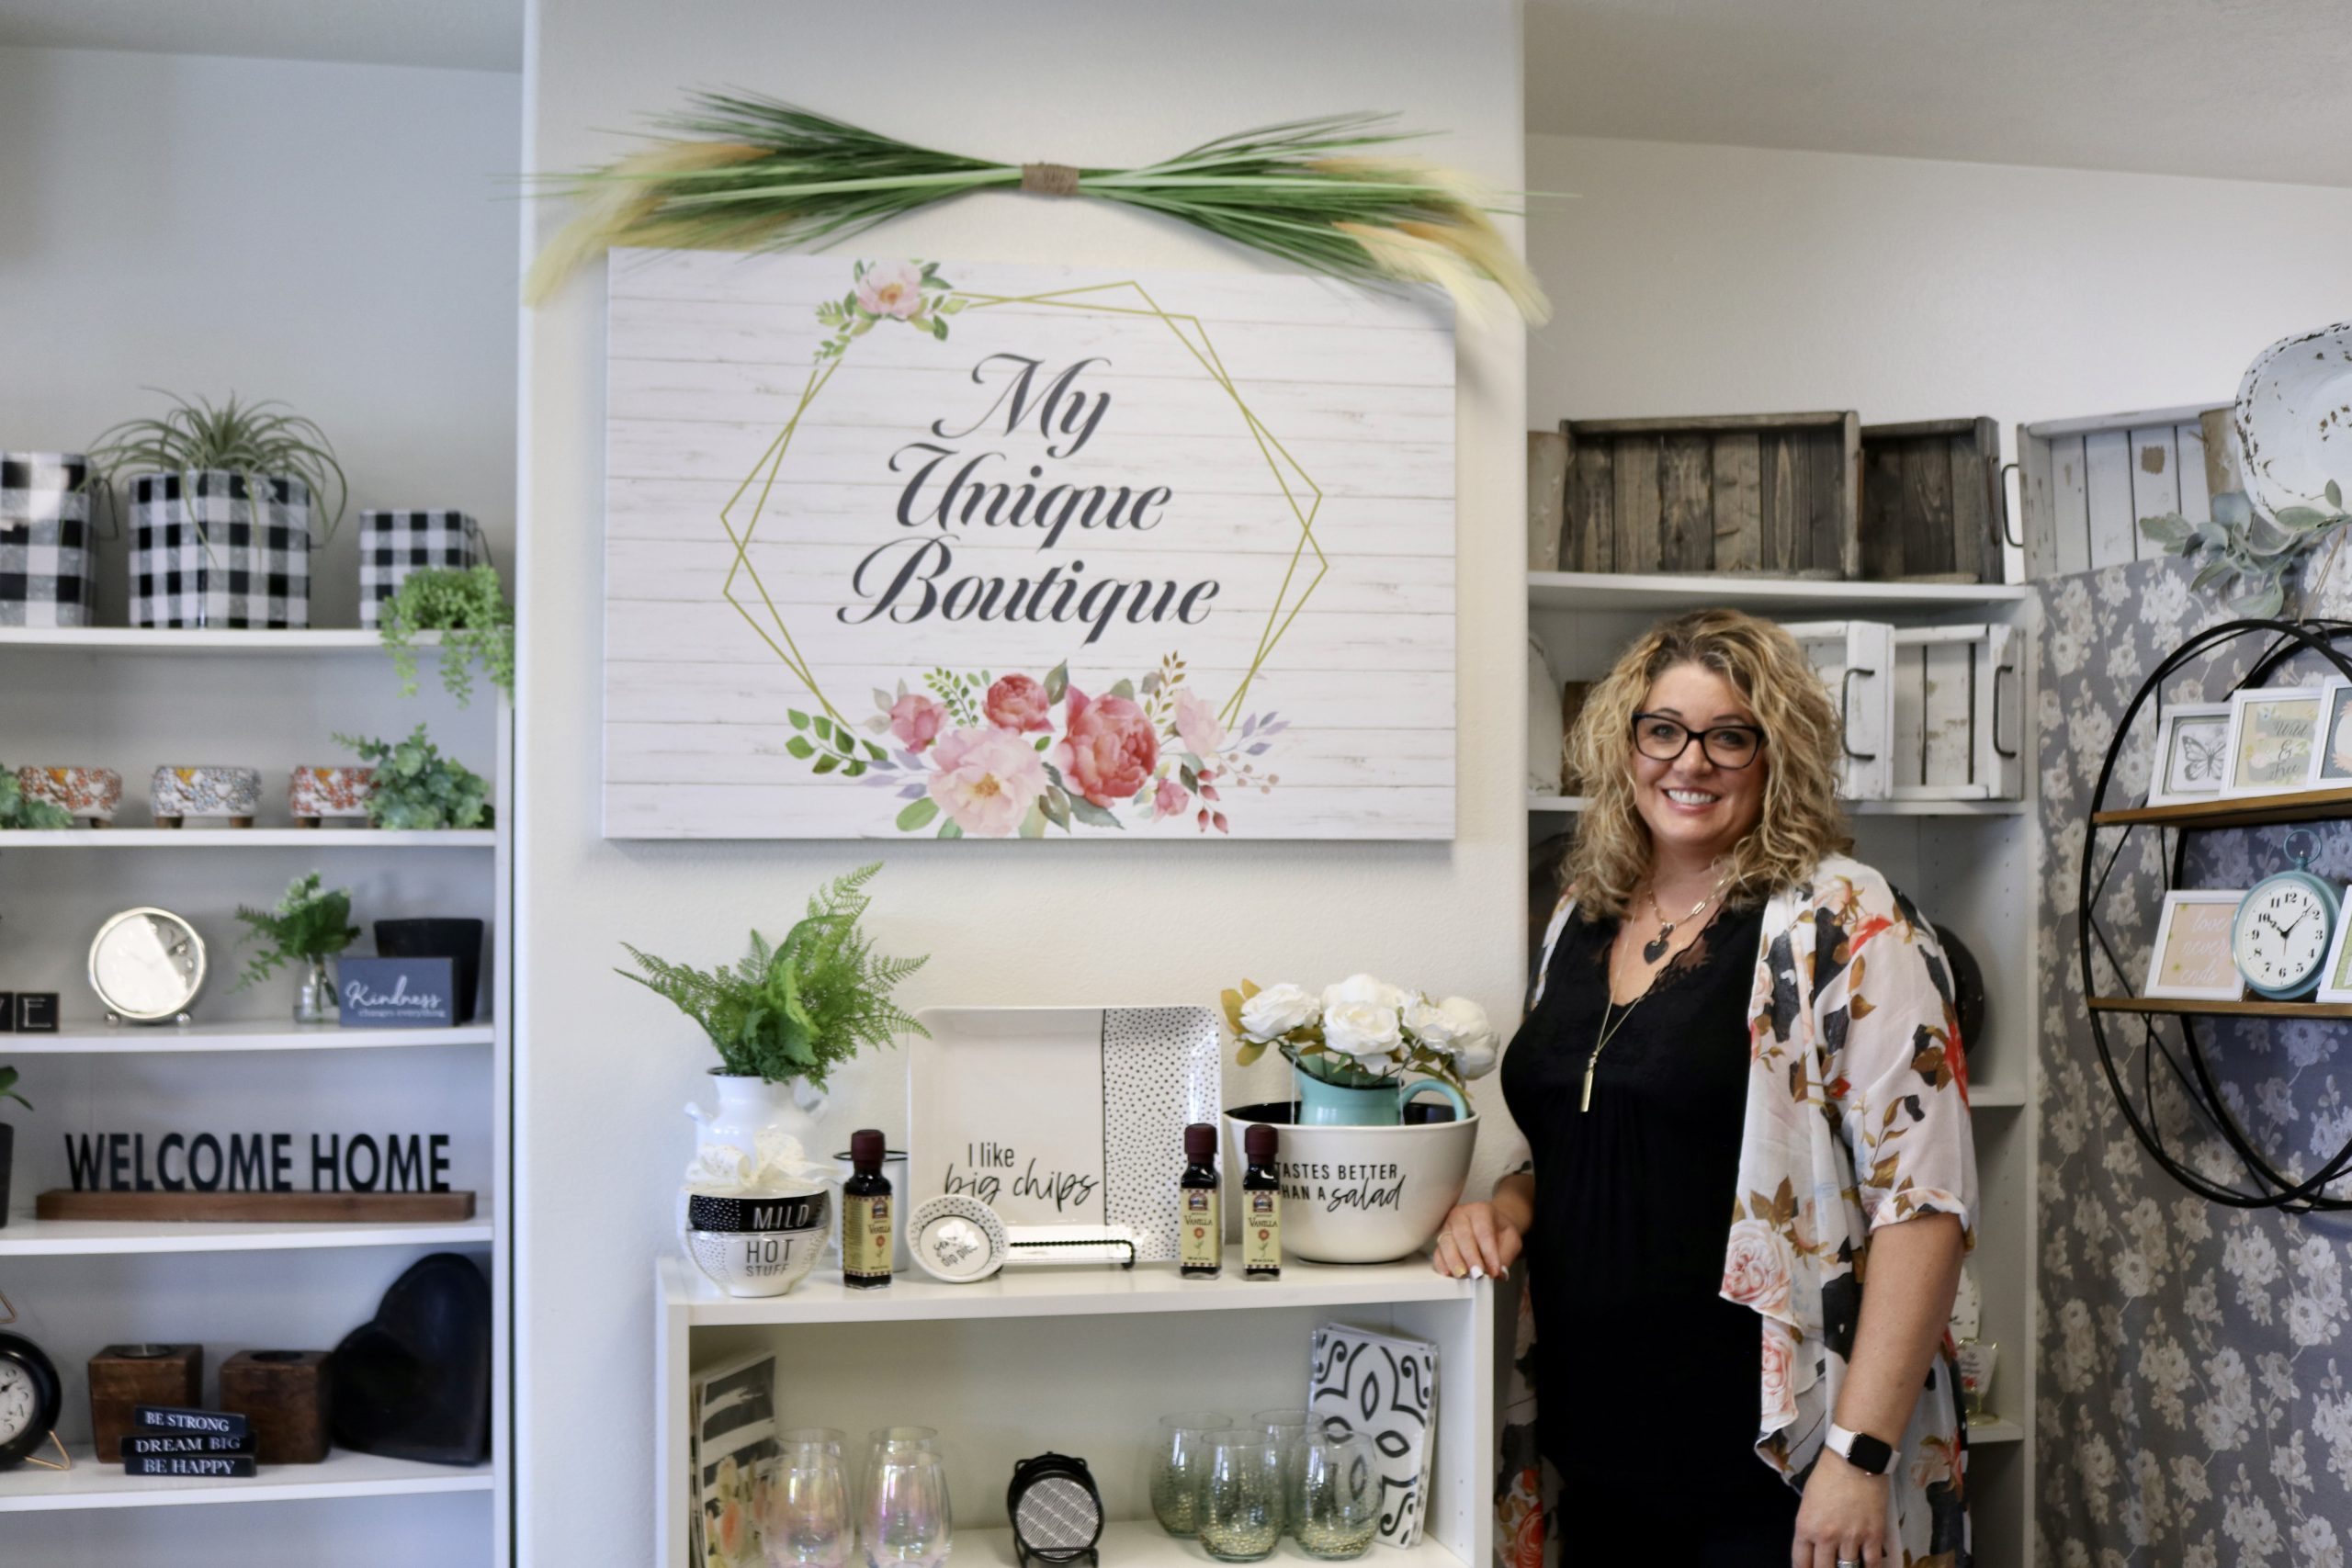 St. George boutique owner creates custom gift baskets, clothing, home decor  – St George News